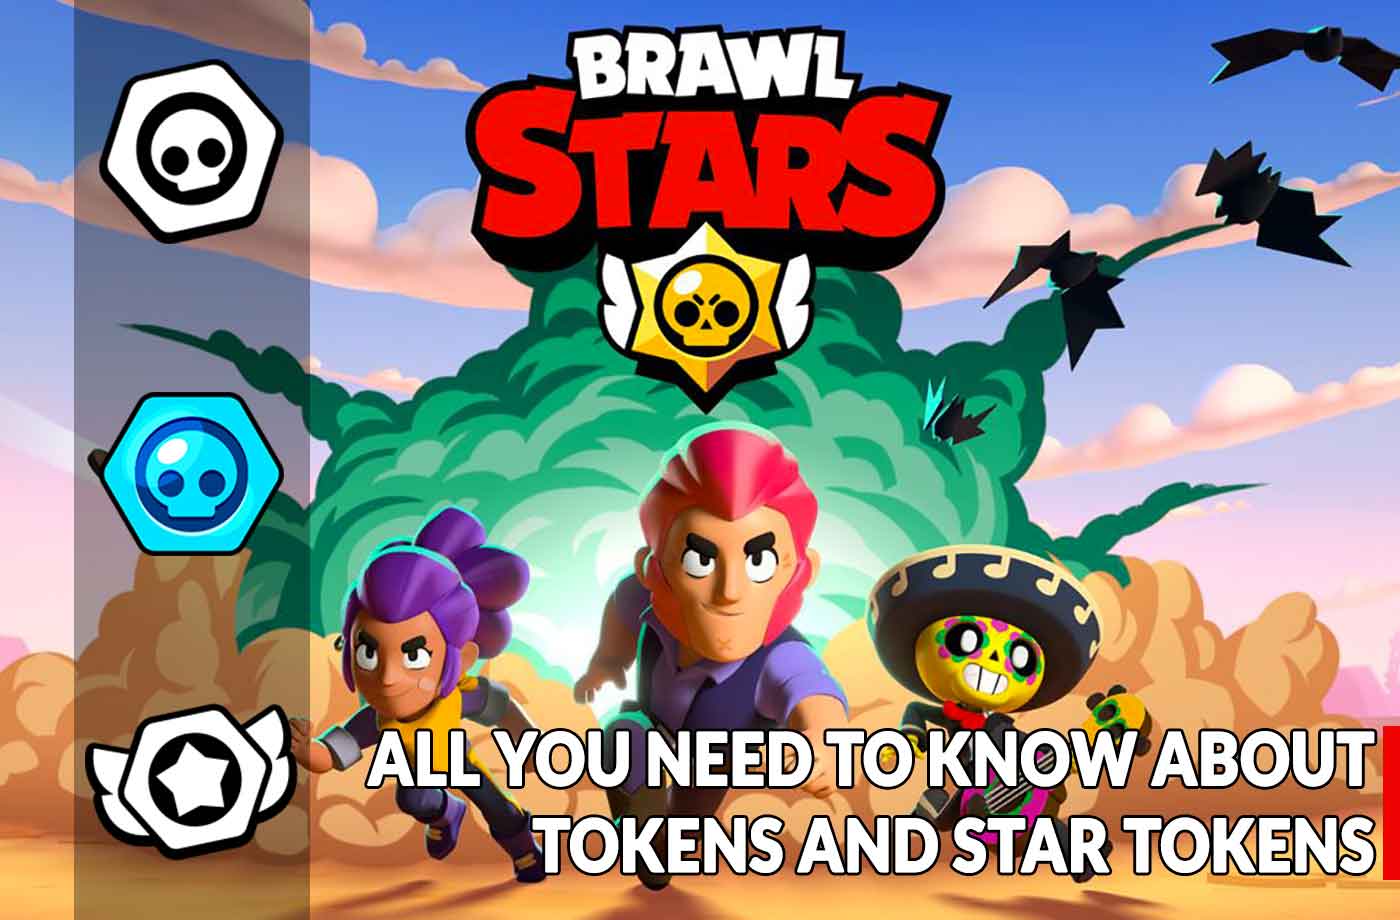 Guide Brawl Stars How To Quickly Gain Tokens And Star Tokens Kill The Game - comment changer son icone brawl stars